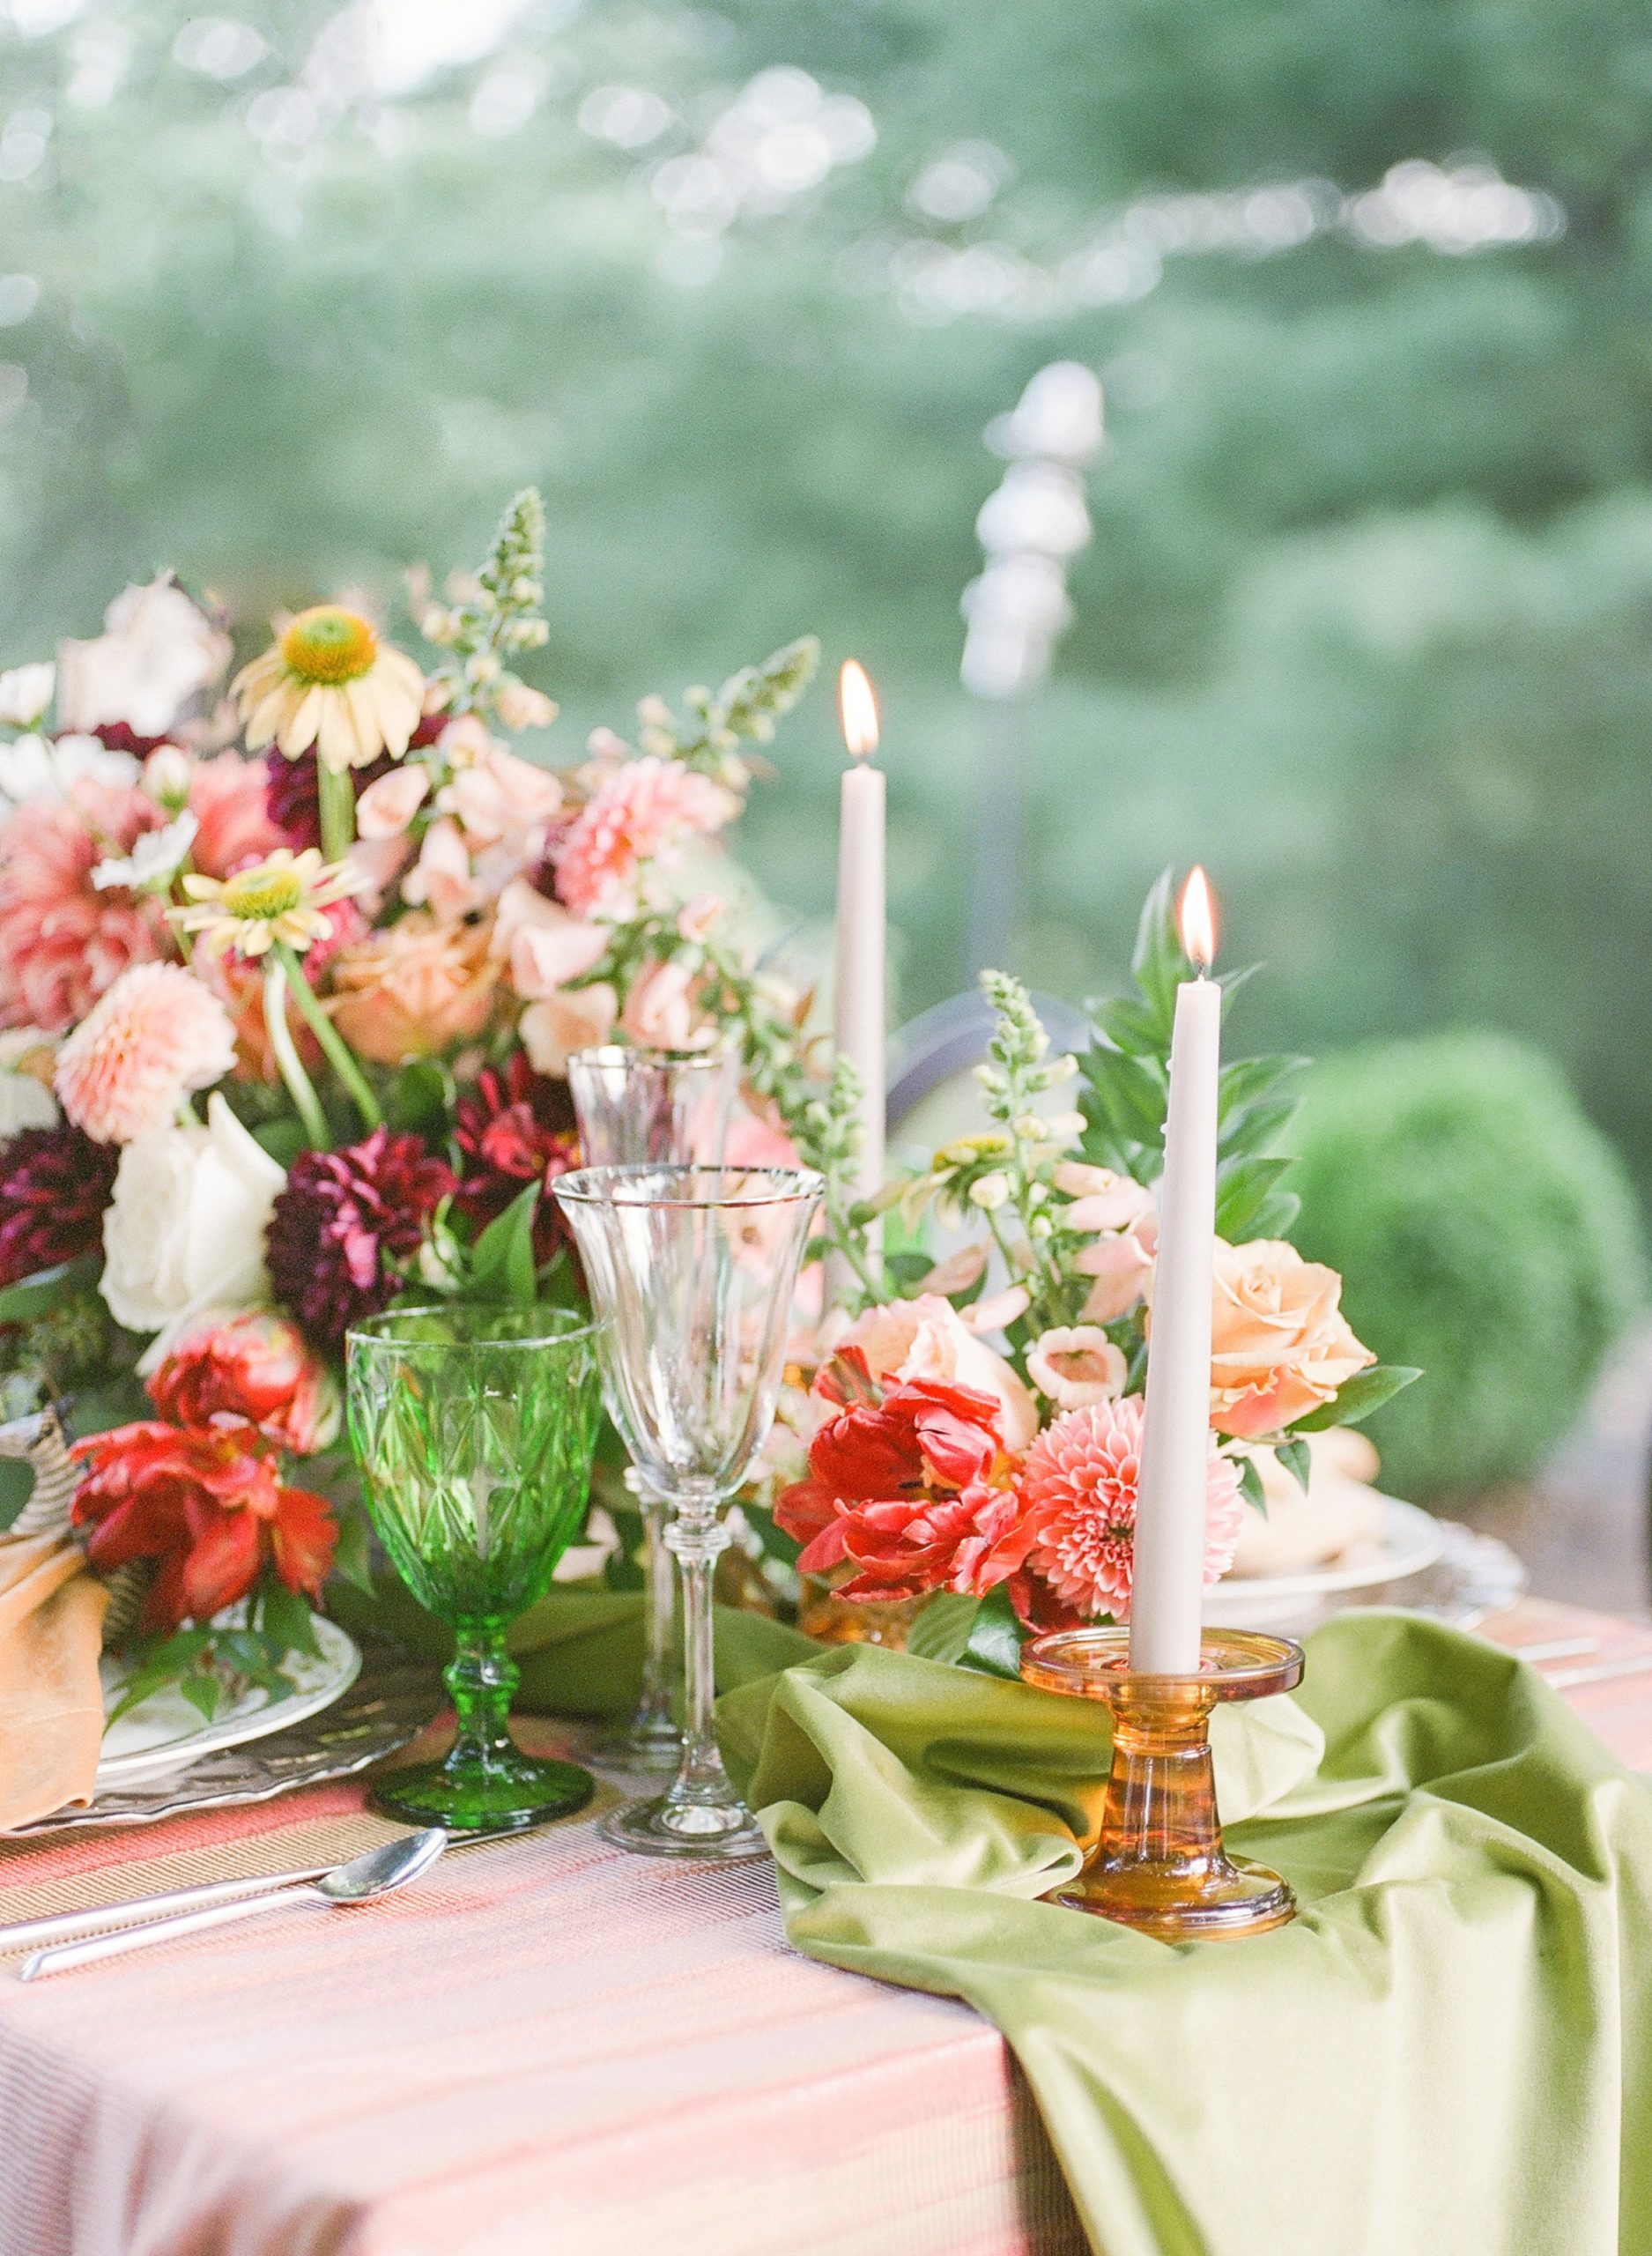 Washington, DC wedding photographer, Alicia Lacey captures this unique and subtle safari inspired wedding decor from SRS Events.